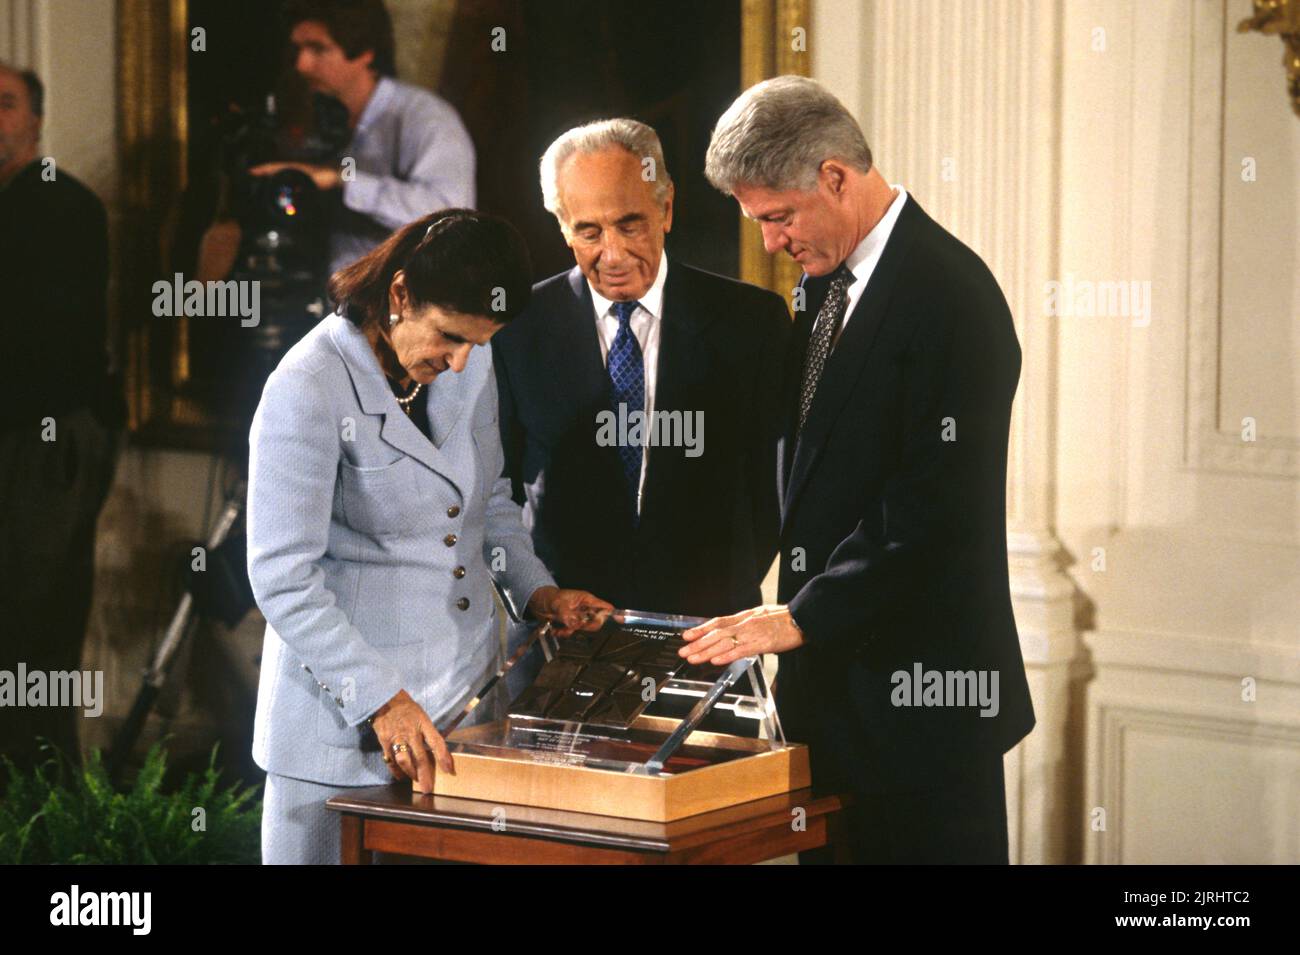 Israeli Prime Minister Shimon Peres, center, and Leah Rabin, left, the wife of assassinated Prime Minister Yitzhak Rabin, present the Rabin-Peres Man of Peace Award to U.S. President Bill Clinton, during a ceremony in the East Room of the White House, November 21, 1997 in Washington, D.C. Stock Photo